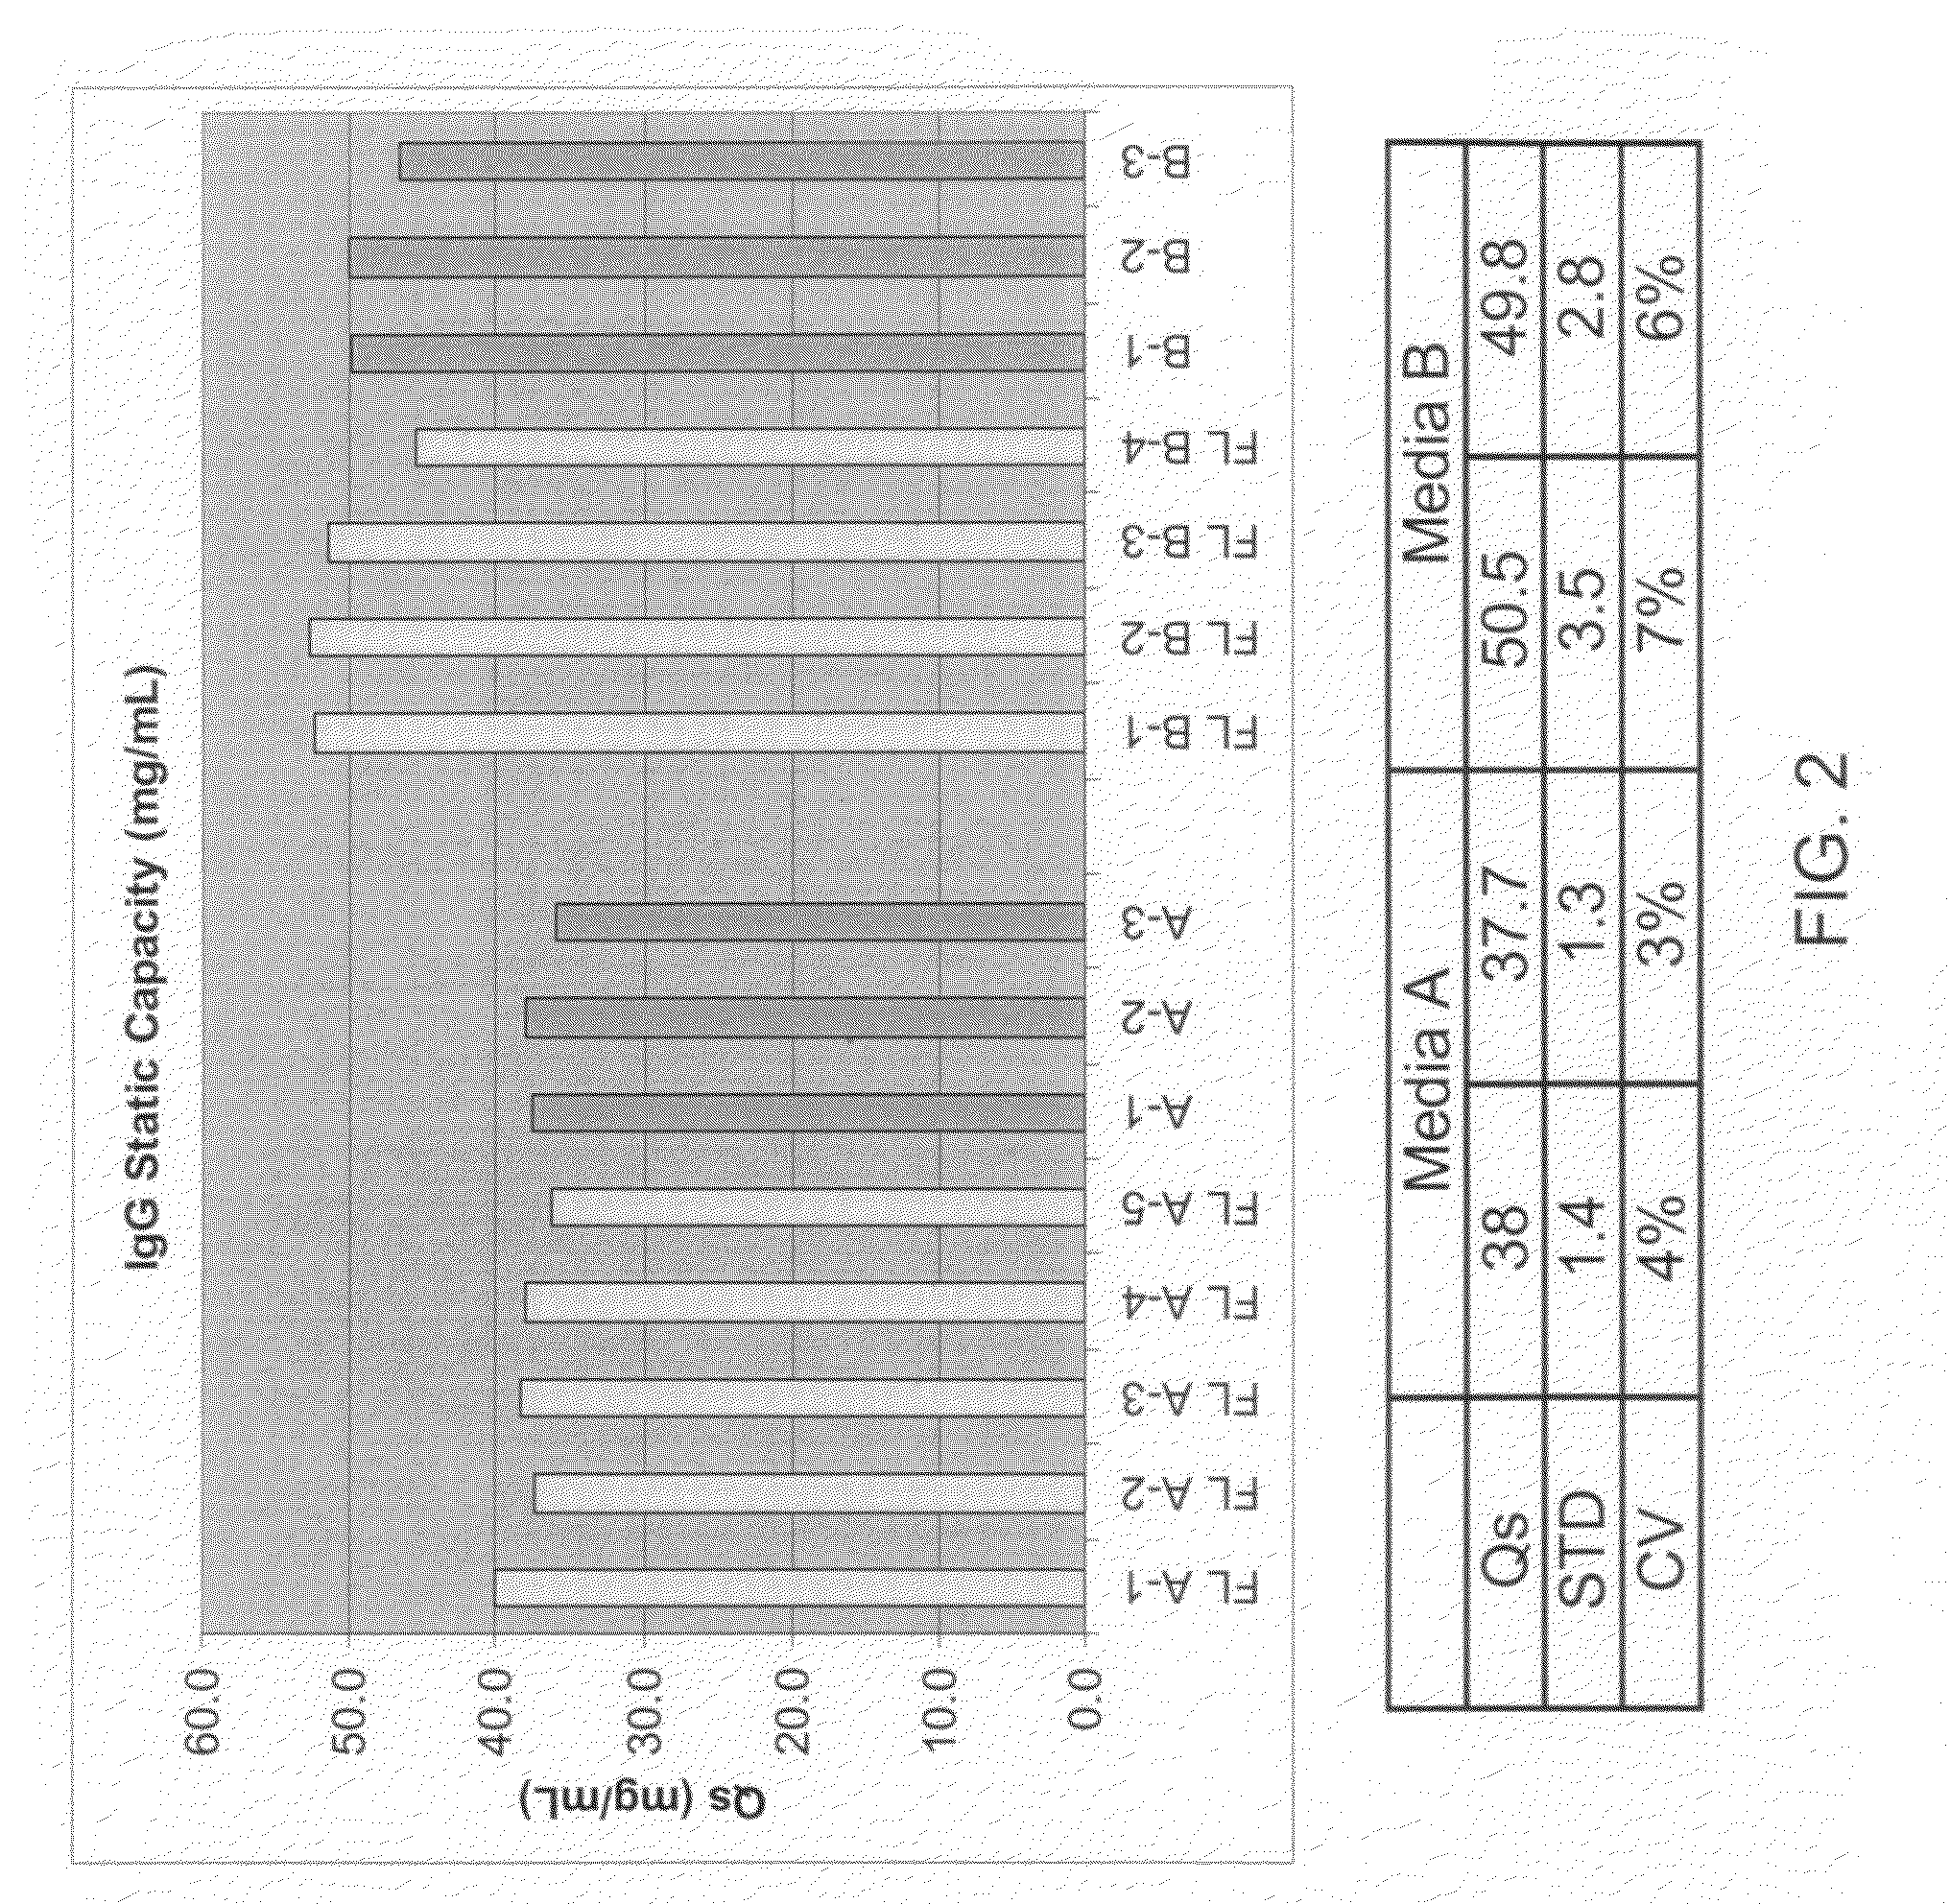 Methods for Quantifying Protein Leakage From Protein Based Affinity Chromatography Resins